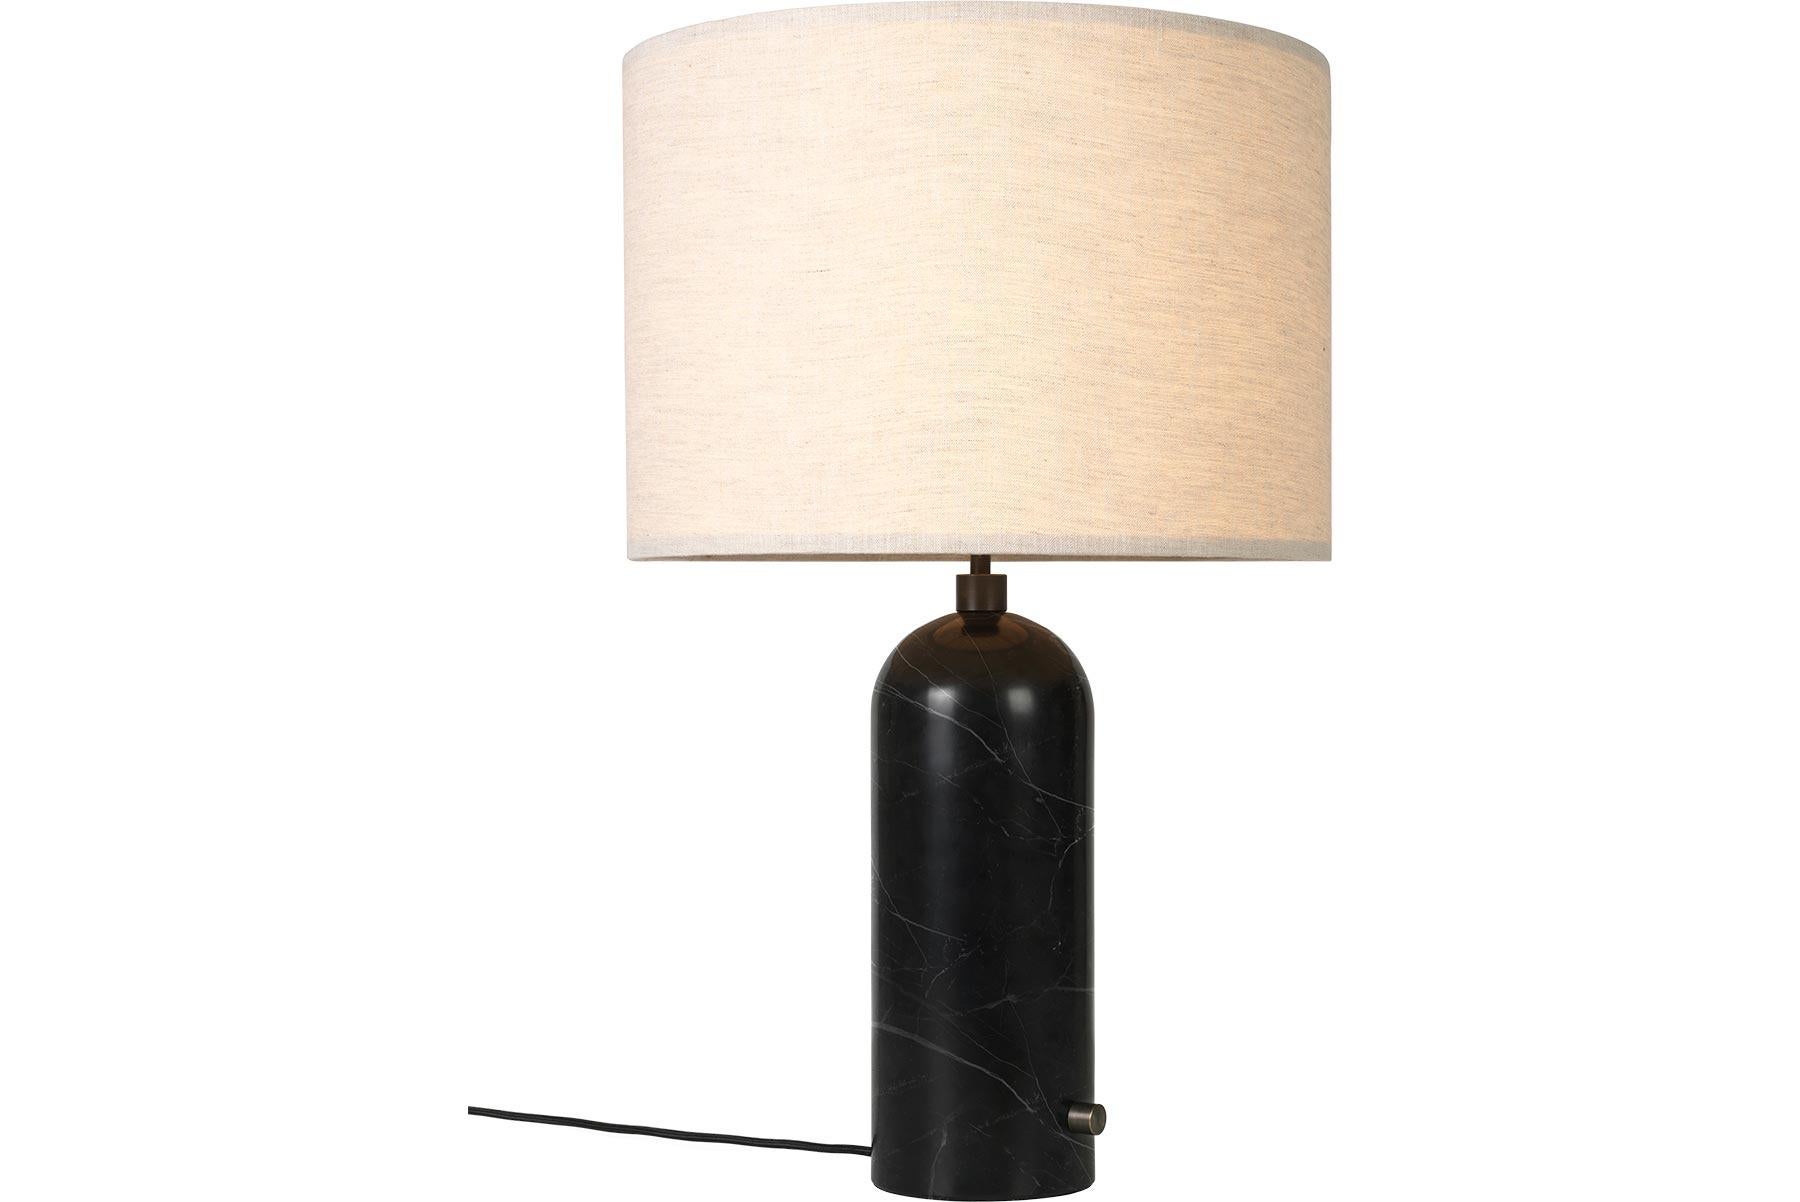 Gravity Table Lamp, Large, Blackened Steel, Canvas In New Condition For Sale In Berkeley, CA